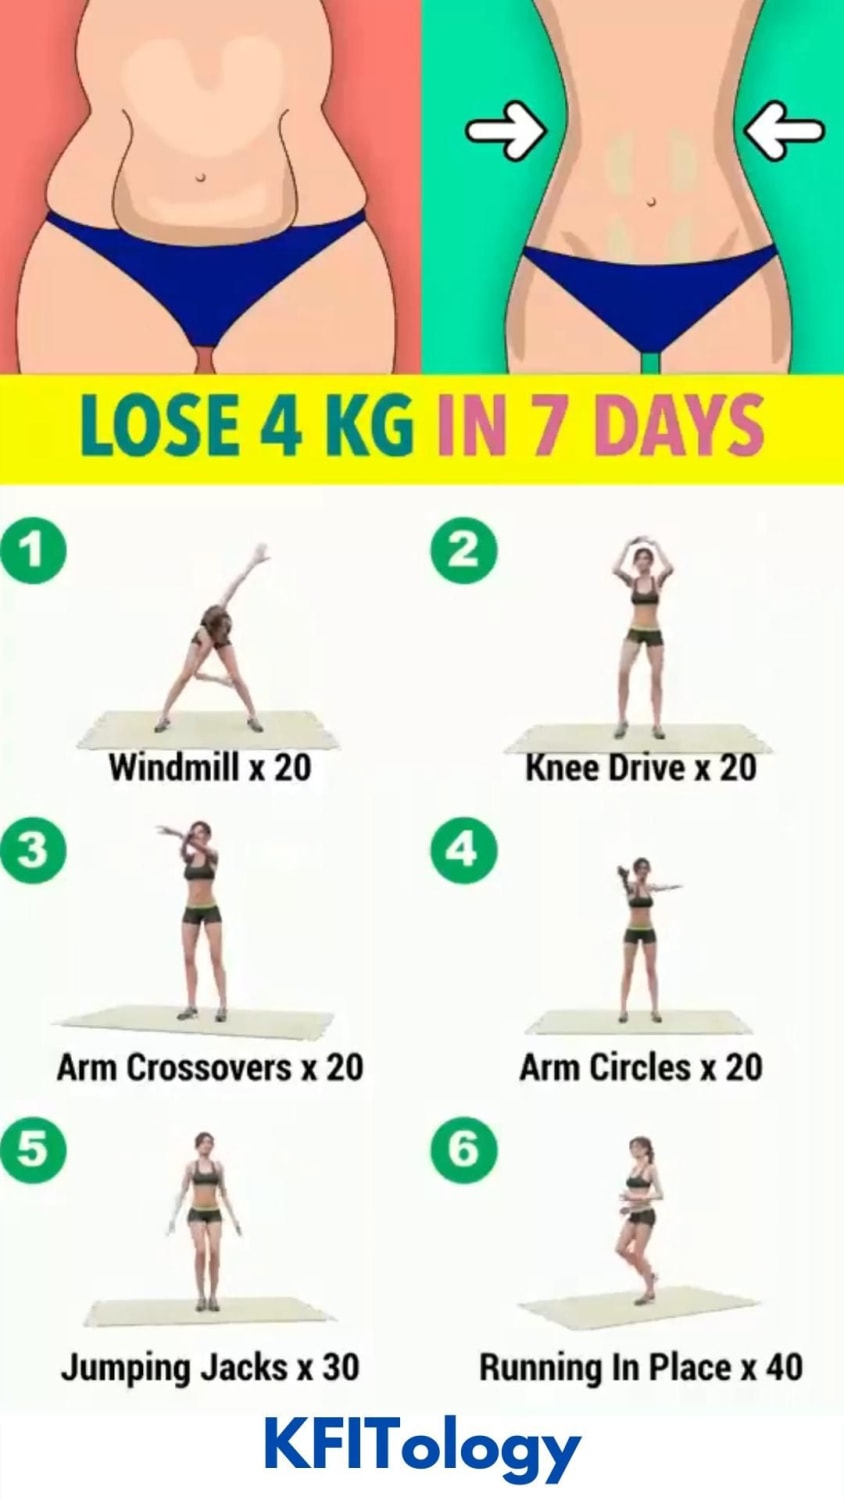 Best Workout To Lose 4 Kg In 7 Days